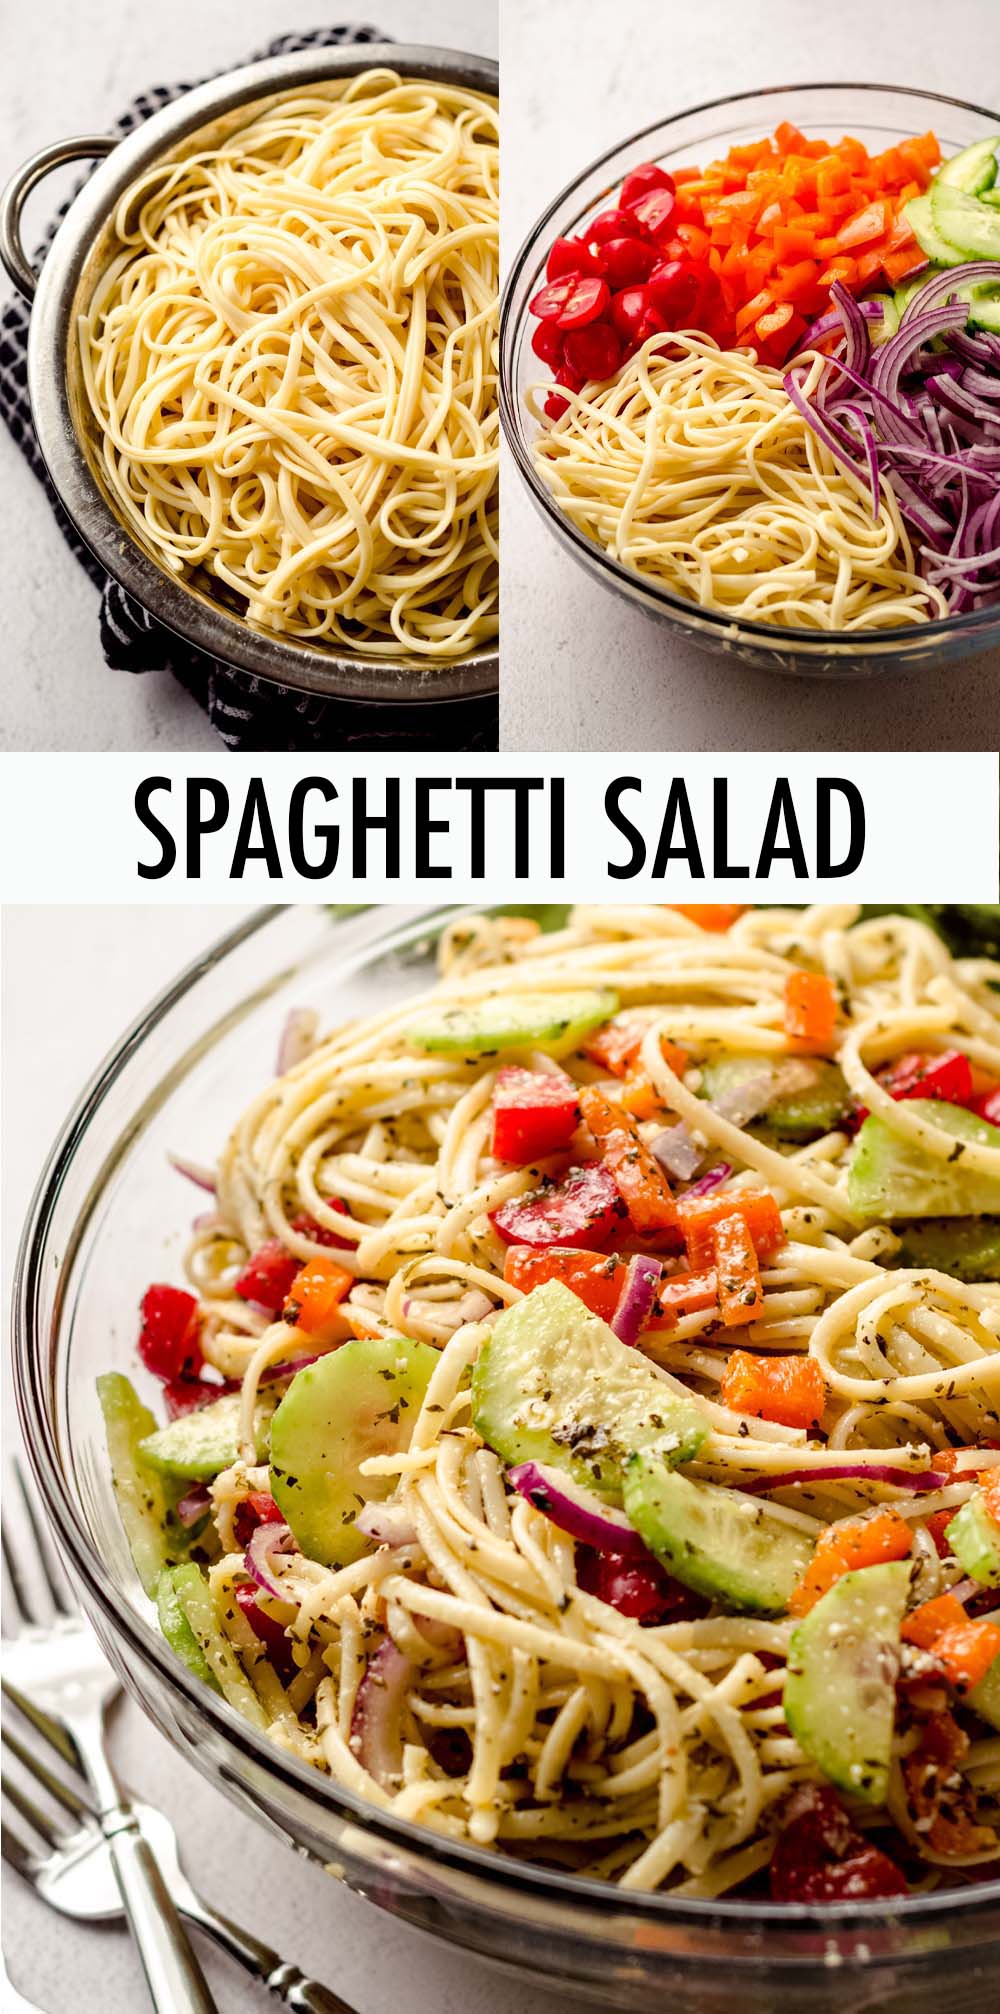 Filled with fresh, crunchy vegetables and dressed in perfectly seasoned Italian dressing, this spaghetti salad recipe is a great replacement for a non-traditional pasta salad recipe. via @frshaprilflours